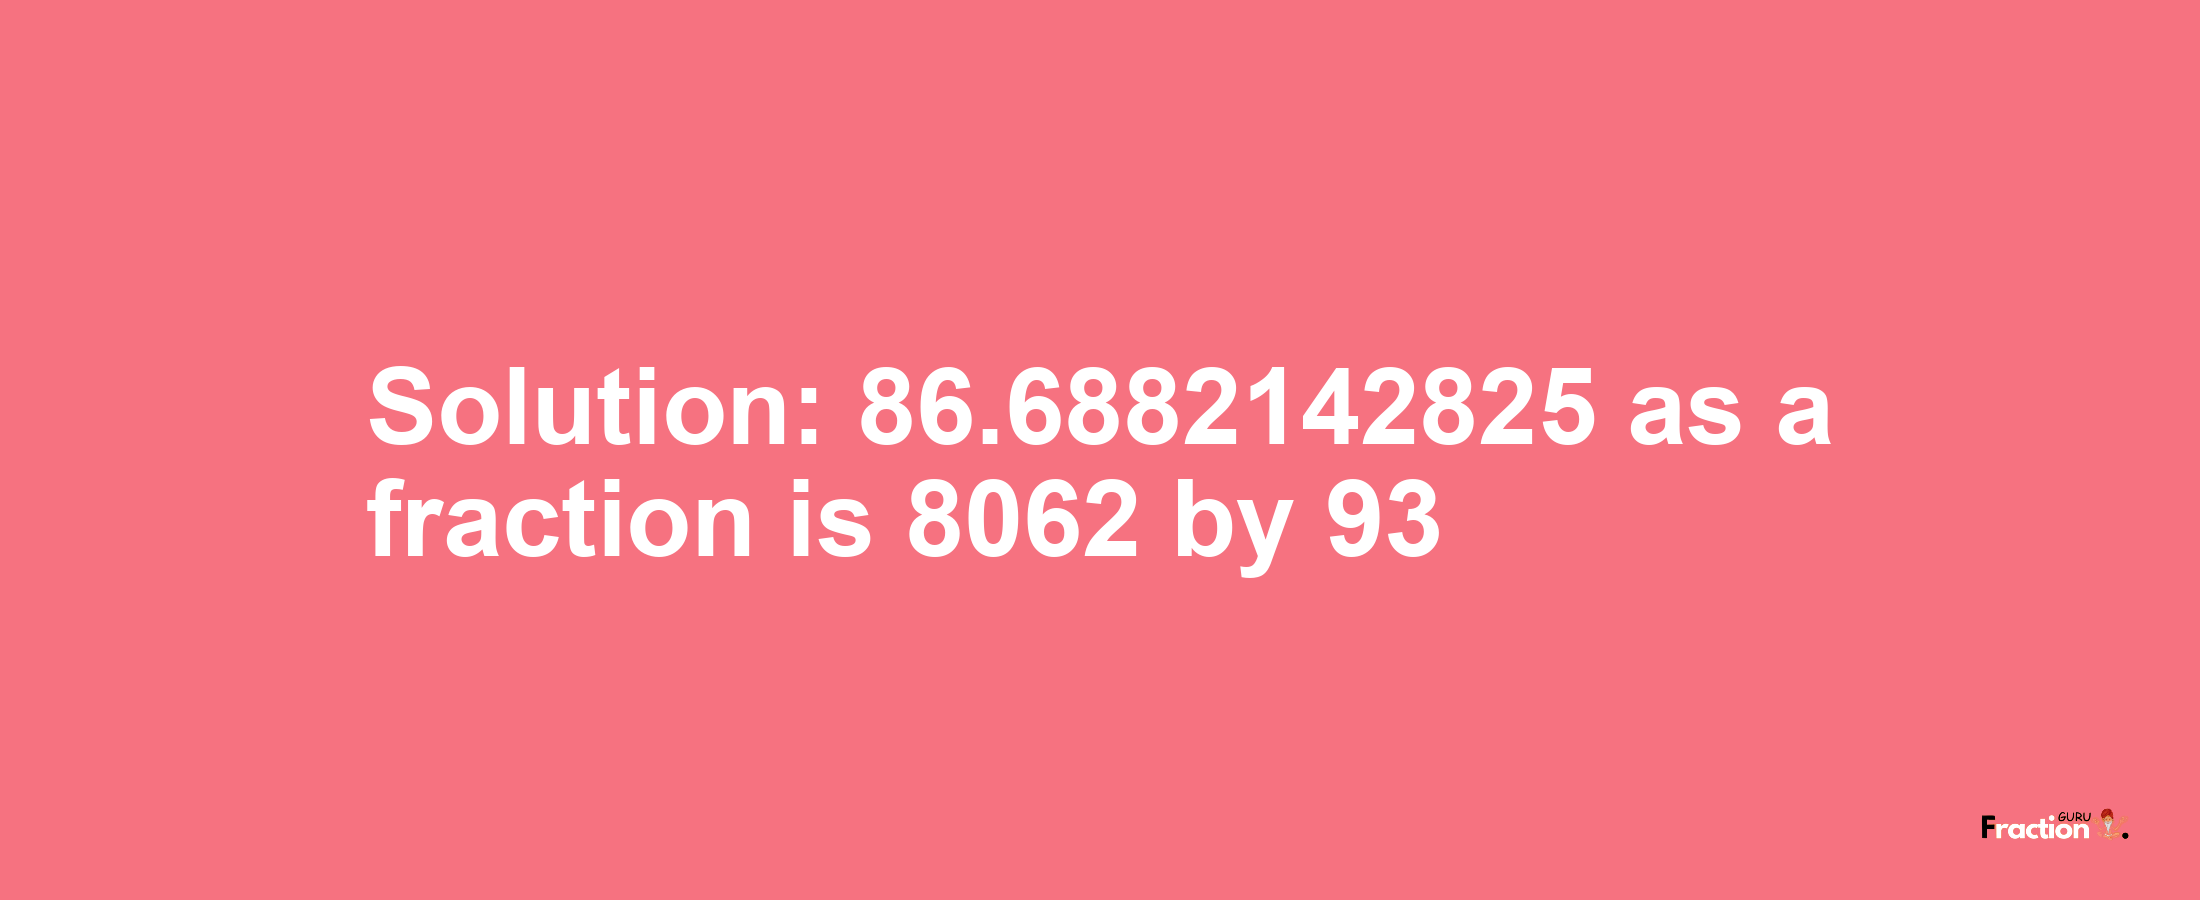 Solution:86.6882142825 as a fraction is 8062/93